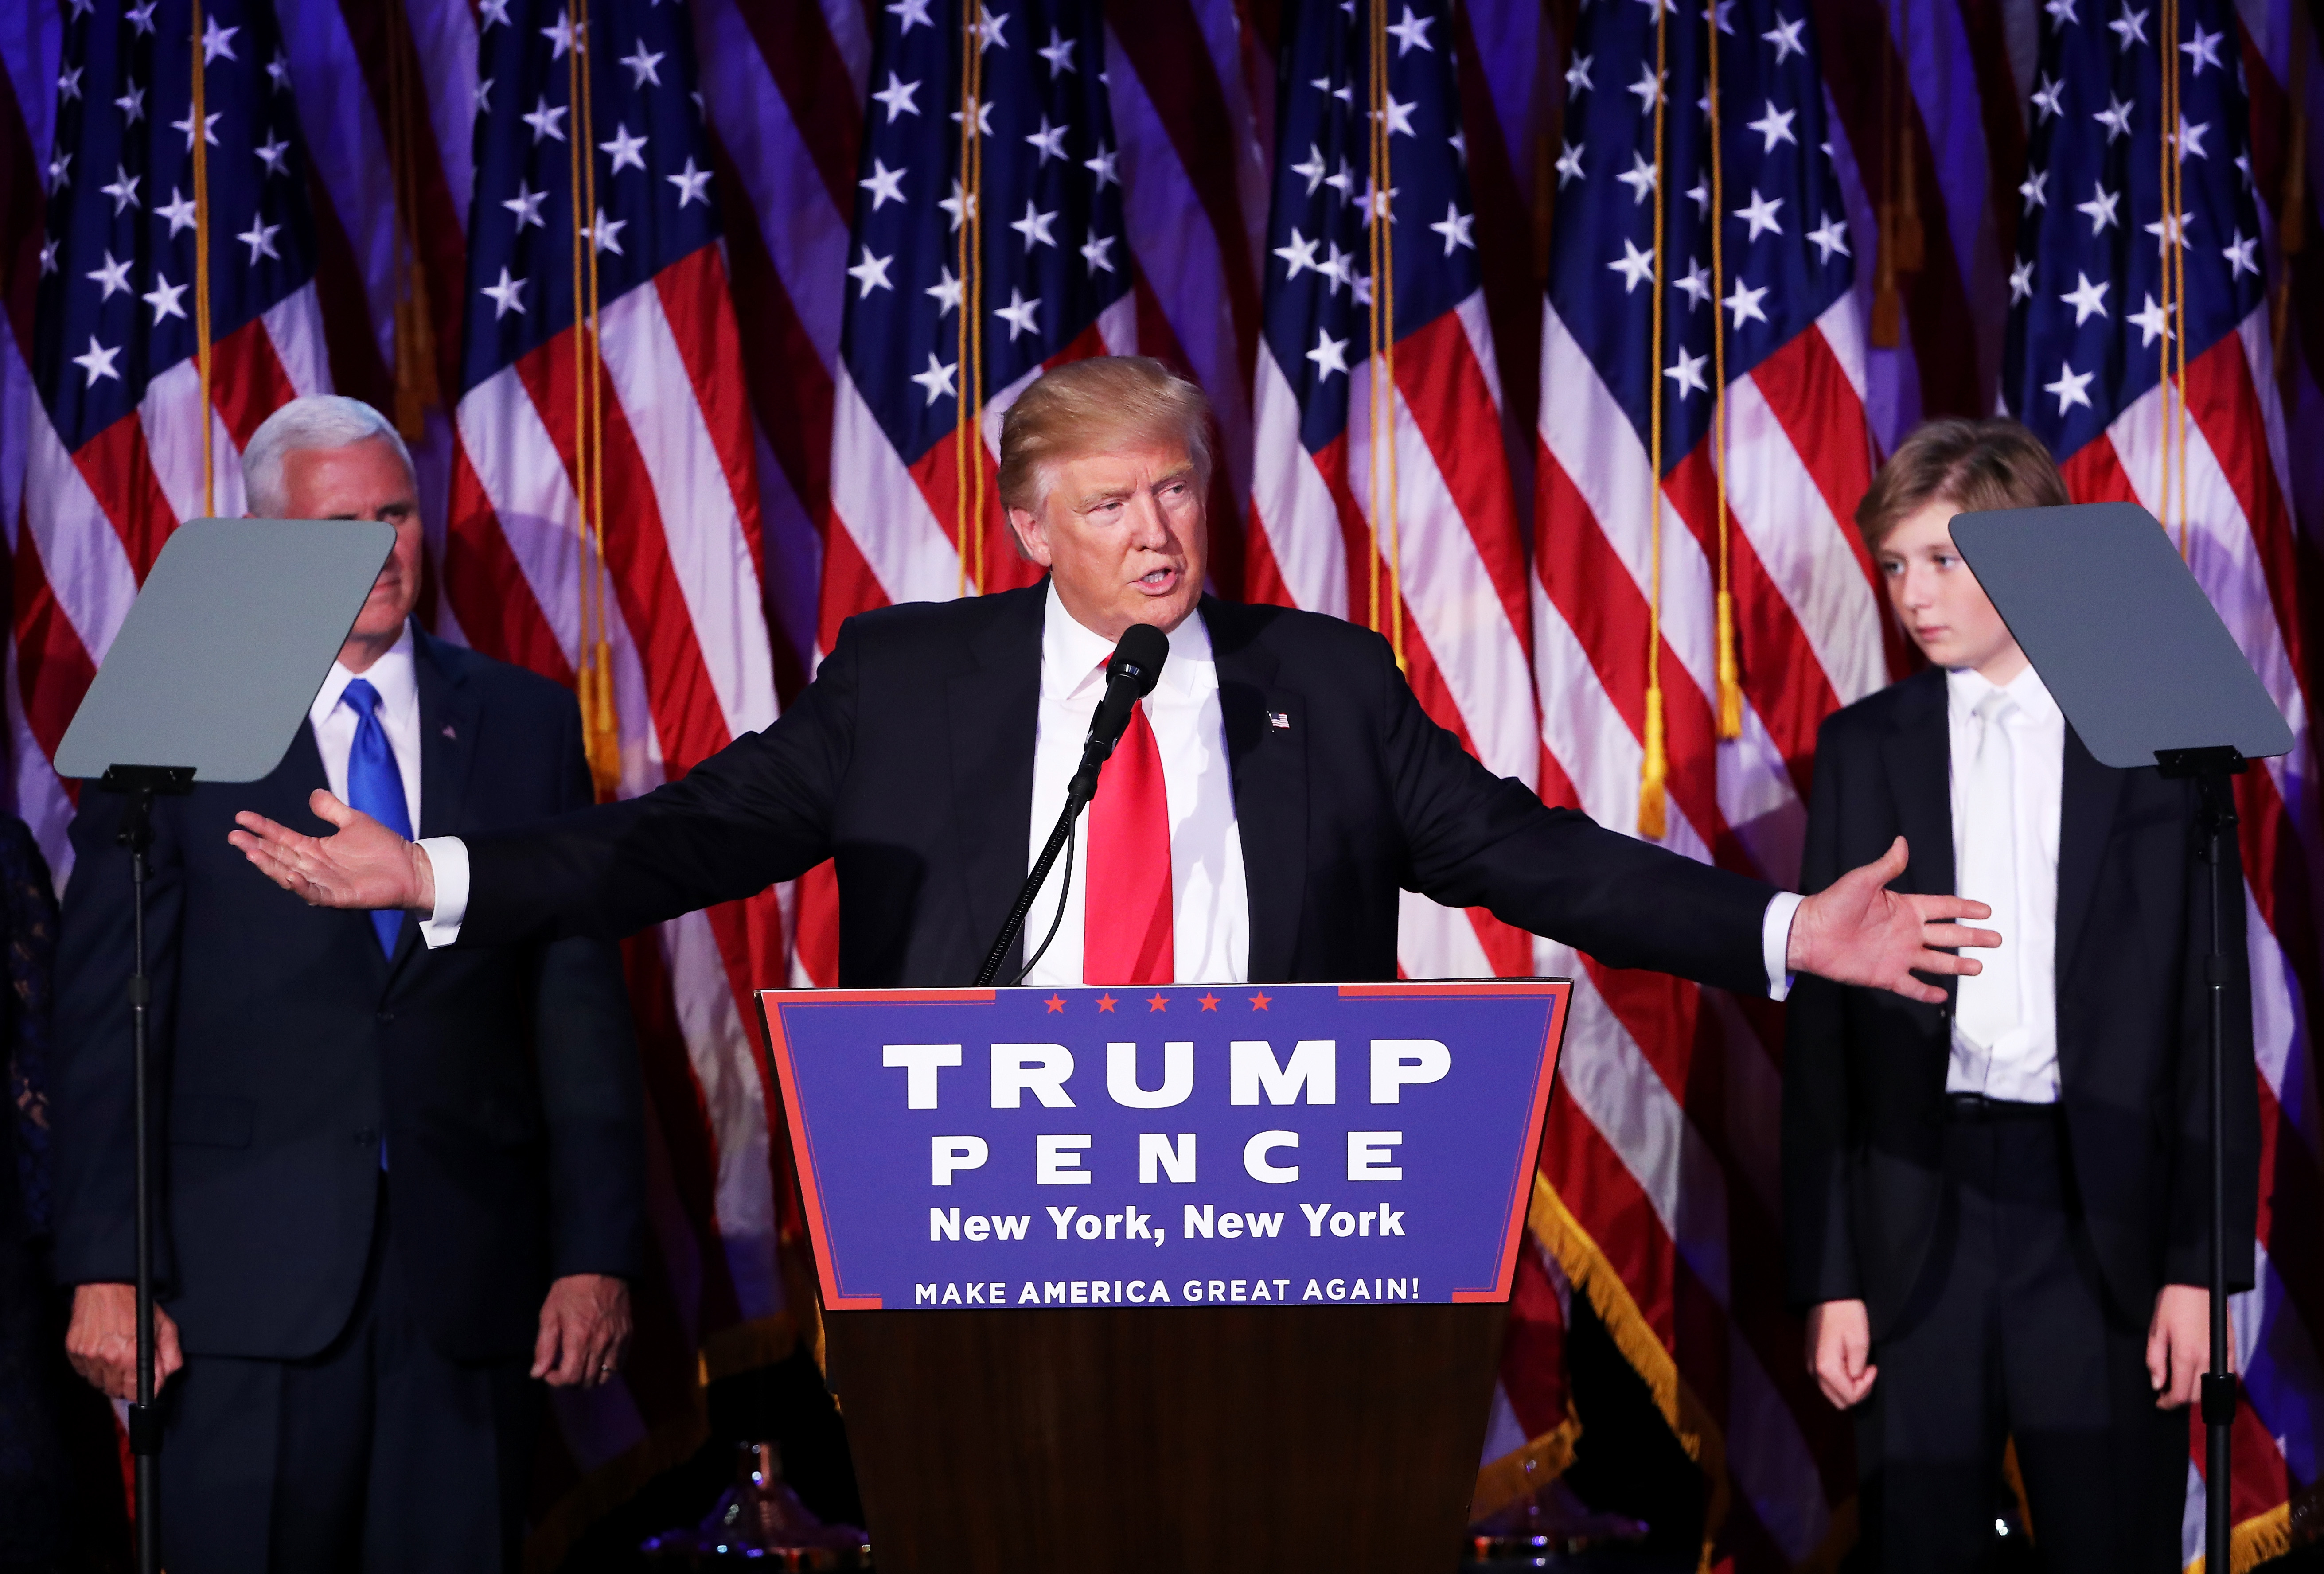 NEW YORK, NY - NOVEMBER 09: Republican president-elect Donald Trump delivers his acceptance speech during his election night event at the New York Hilton Midtown in the early morning hours of November 9, 2016 in New York City. Donald Trump defeated Democratic presidential nominee Hillary Clinton to become the 45th president of the United States. Mark Wilson/Getty Images/AFP